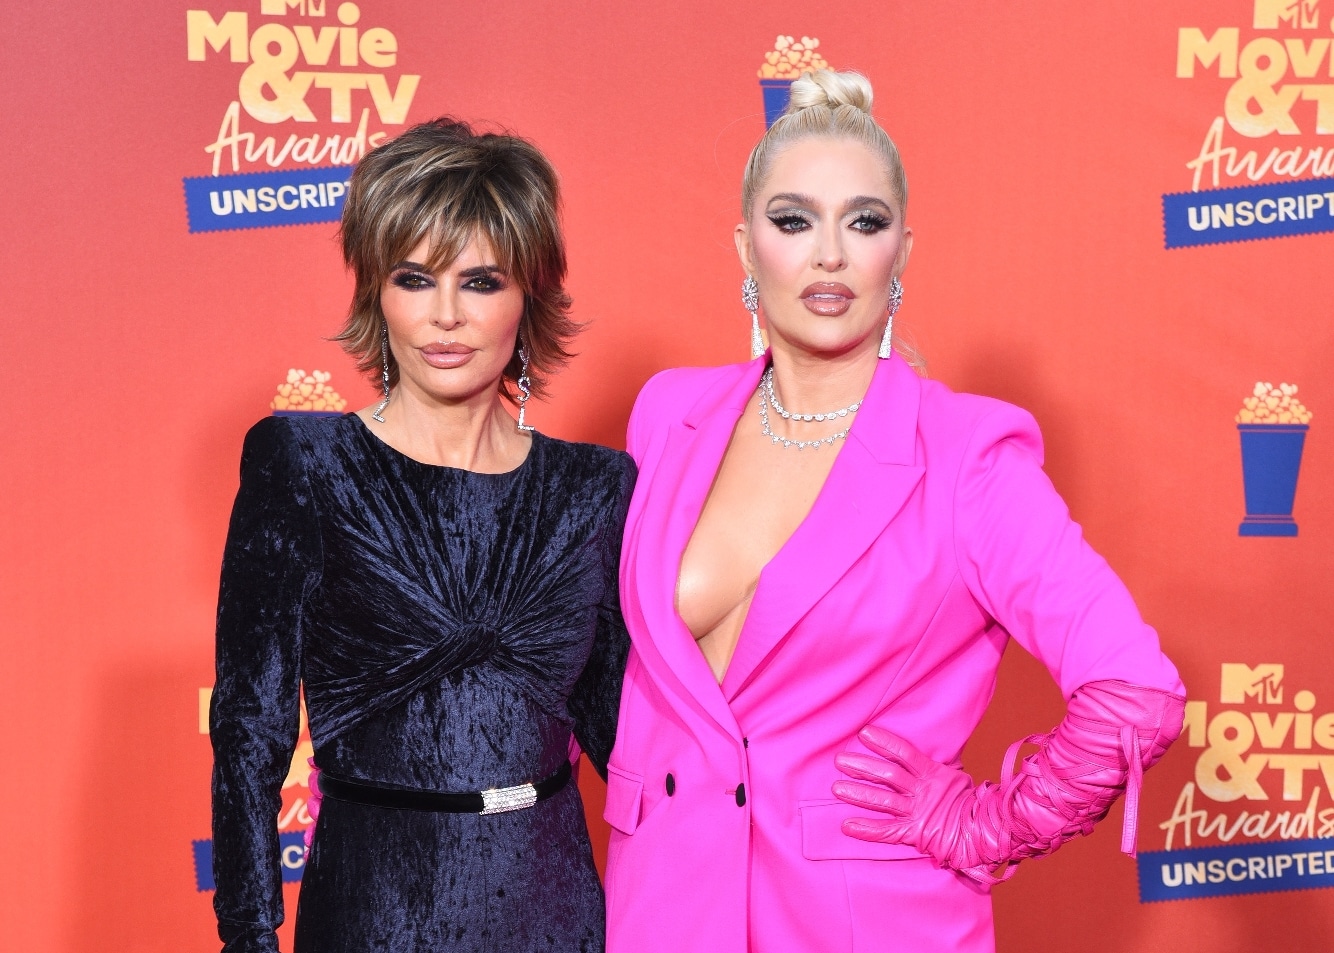 Erika Jayne Talks Filming RHOBH Without Lisa Rinna, Overcoming Legal Woes, and Teases New Las Vegas Show